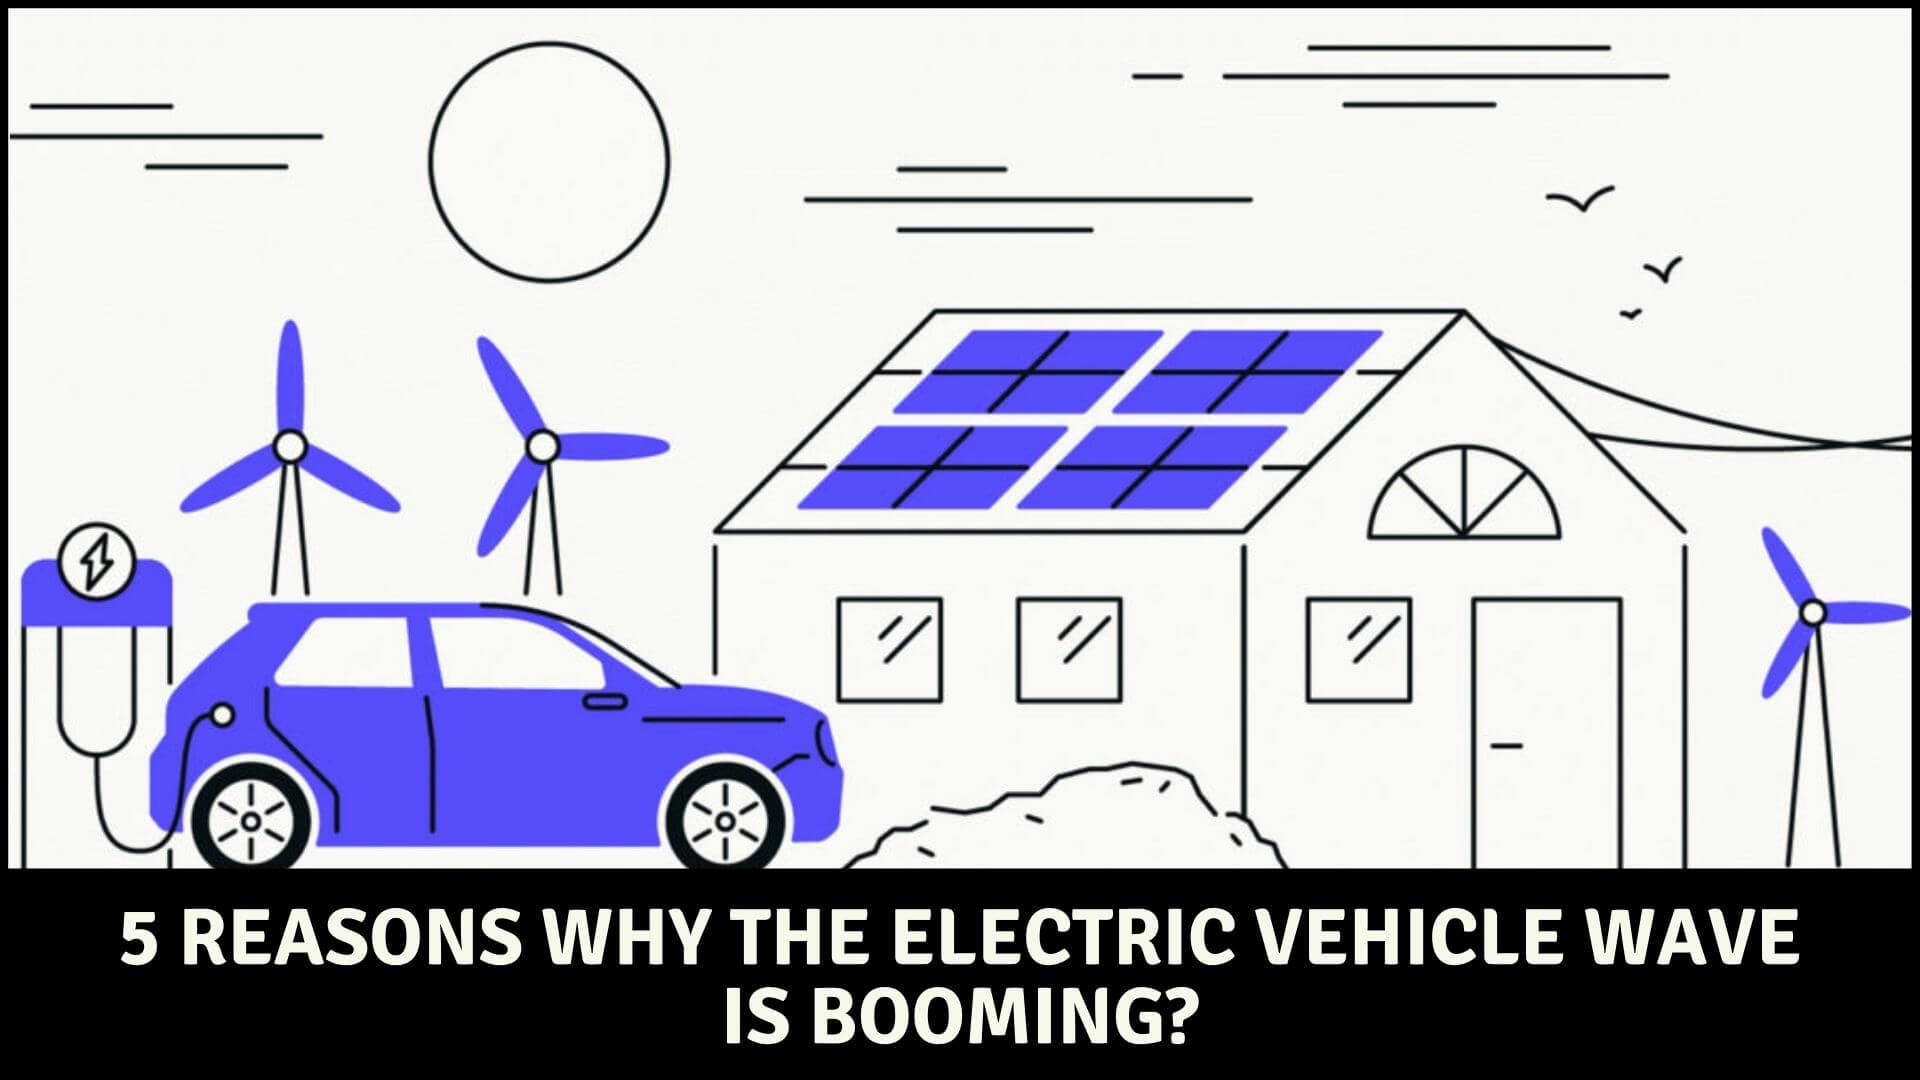 https://e-vehicleinfo.com/5-reasons-why-the-electric-vehicle-wave-is-booming/